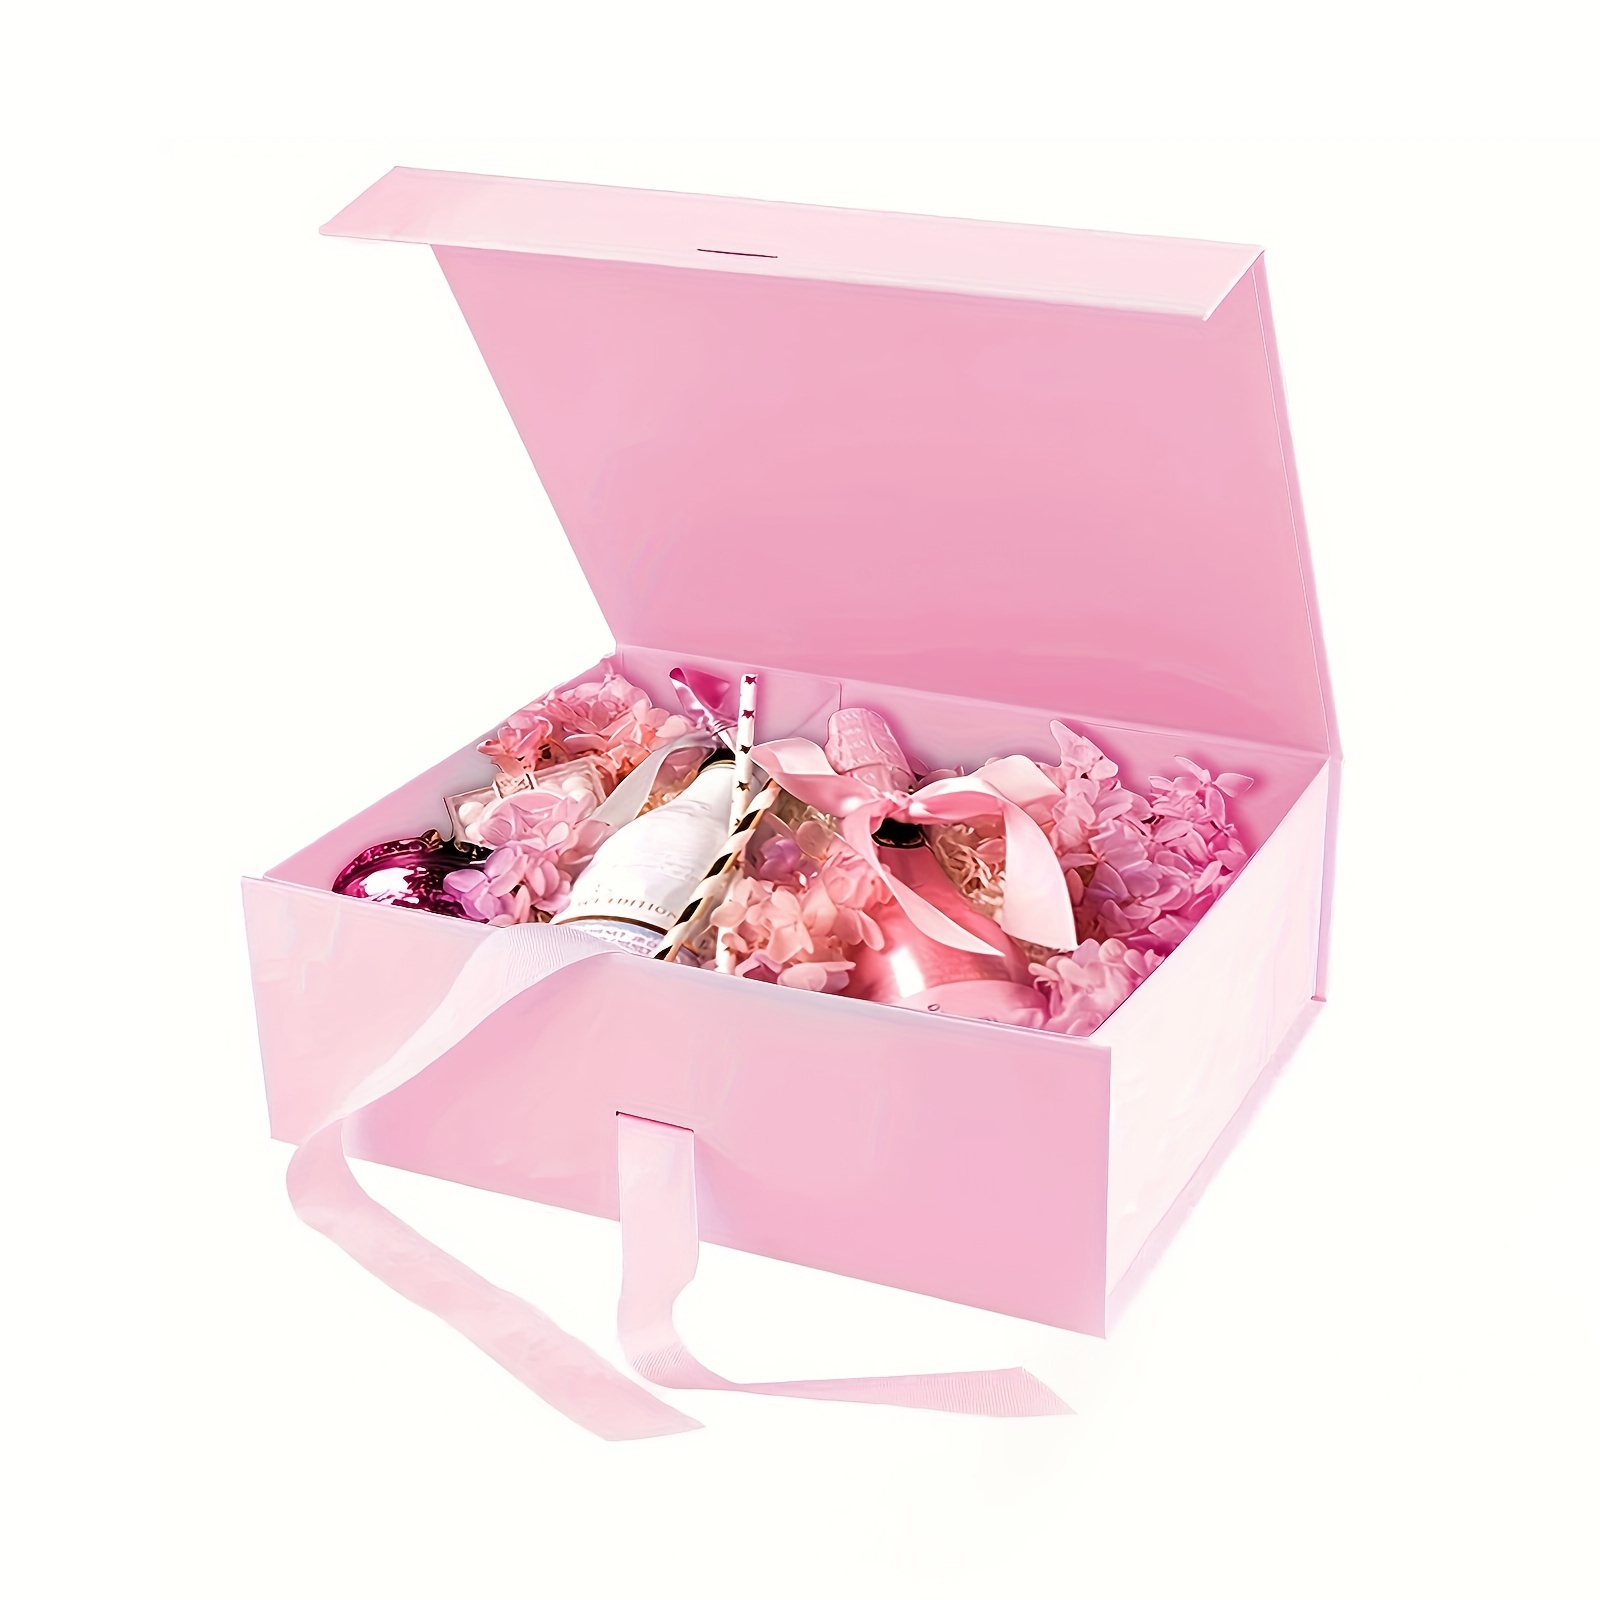 JOHOUSE Large Gift Box, 8 inches Pink Gift Boxes with Lids for Presents,  Wedding Box, Baby Shower, Mother's Day and Graduations